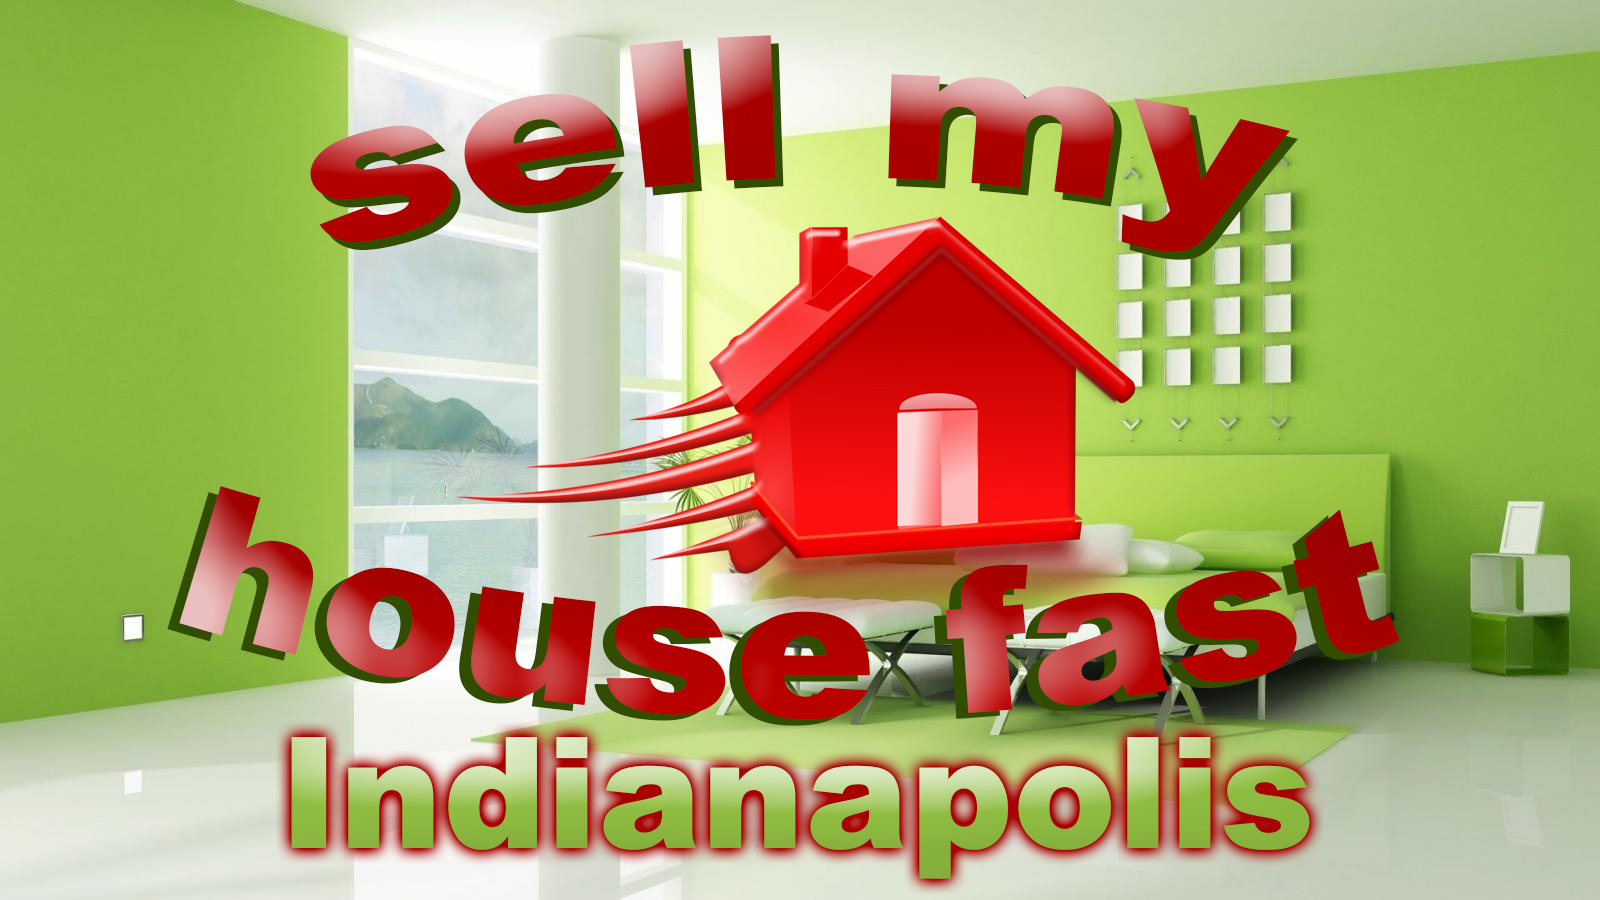 Sell House Fast Indianapolis: Find a Buyer Before You Lose It!